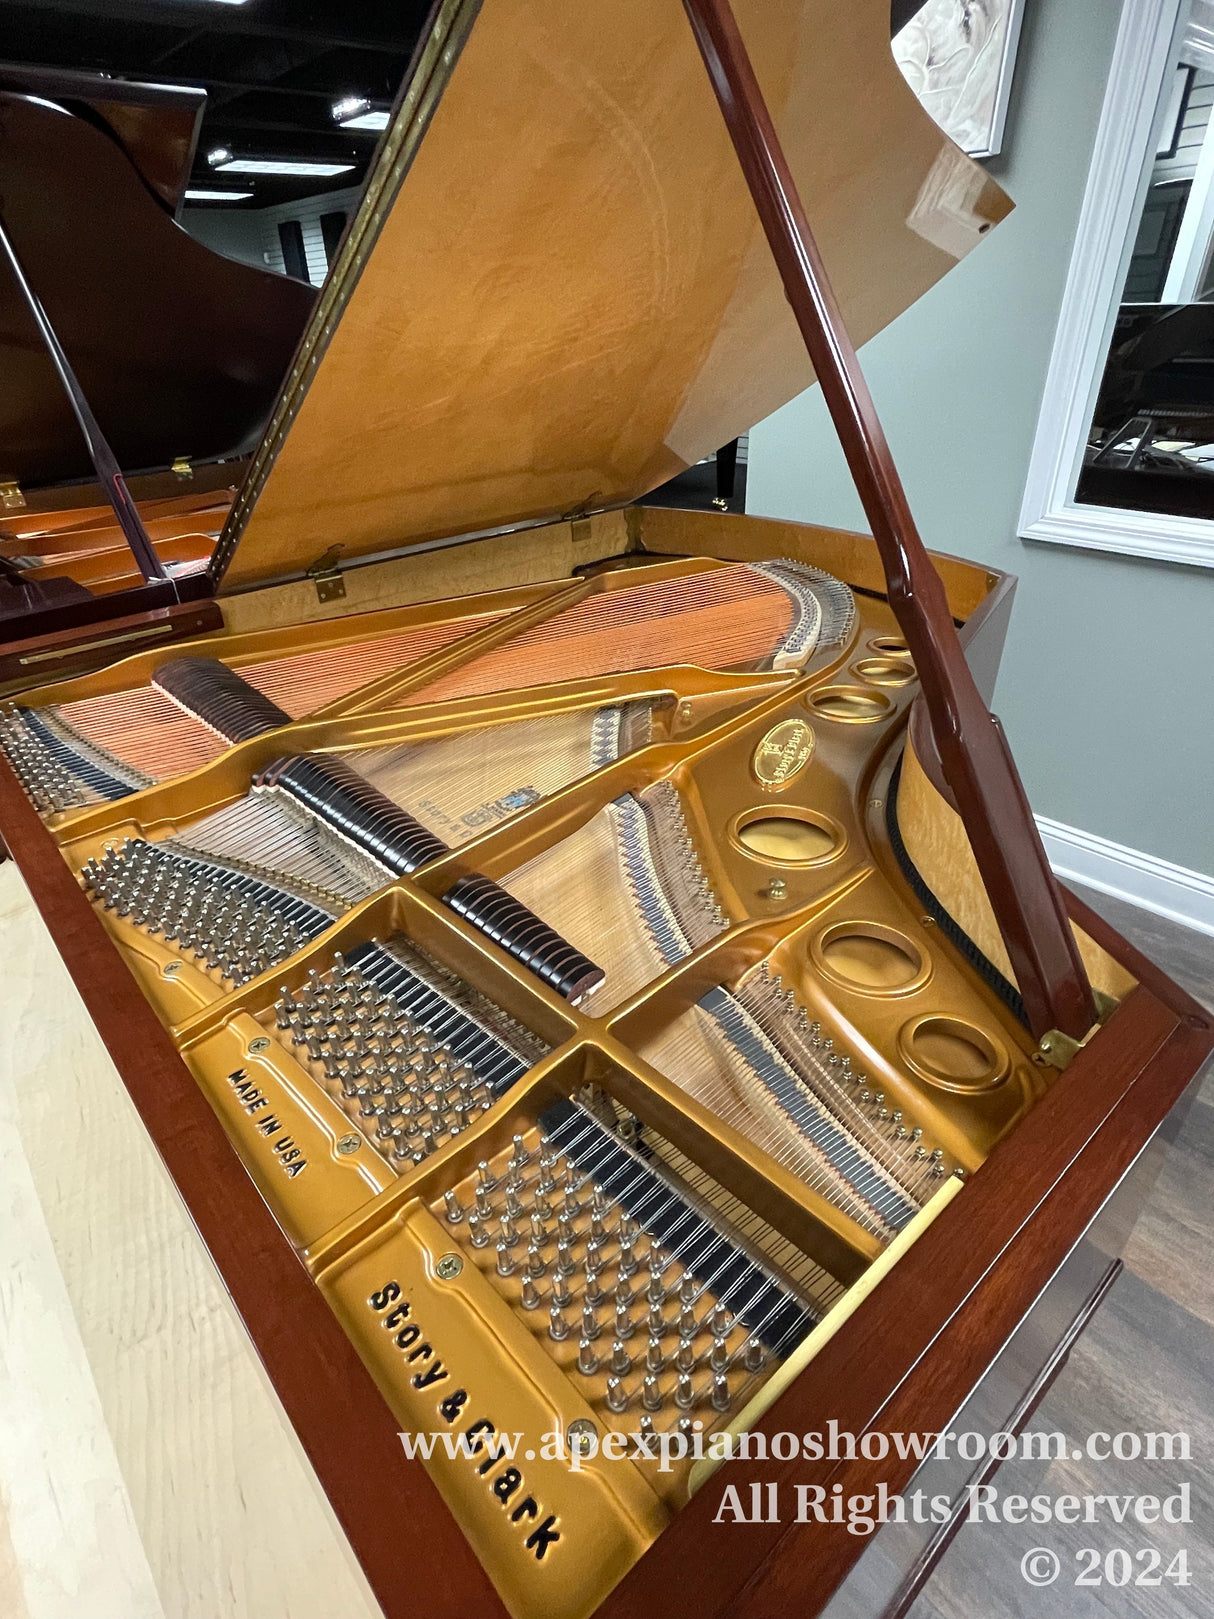 Interior view of a grand piano showing open lid, golden frame, and strings, with a logo of Steinway & Sons and text Made in USA visible.